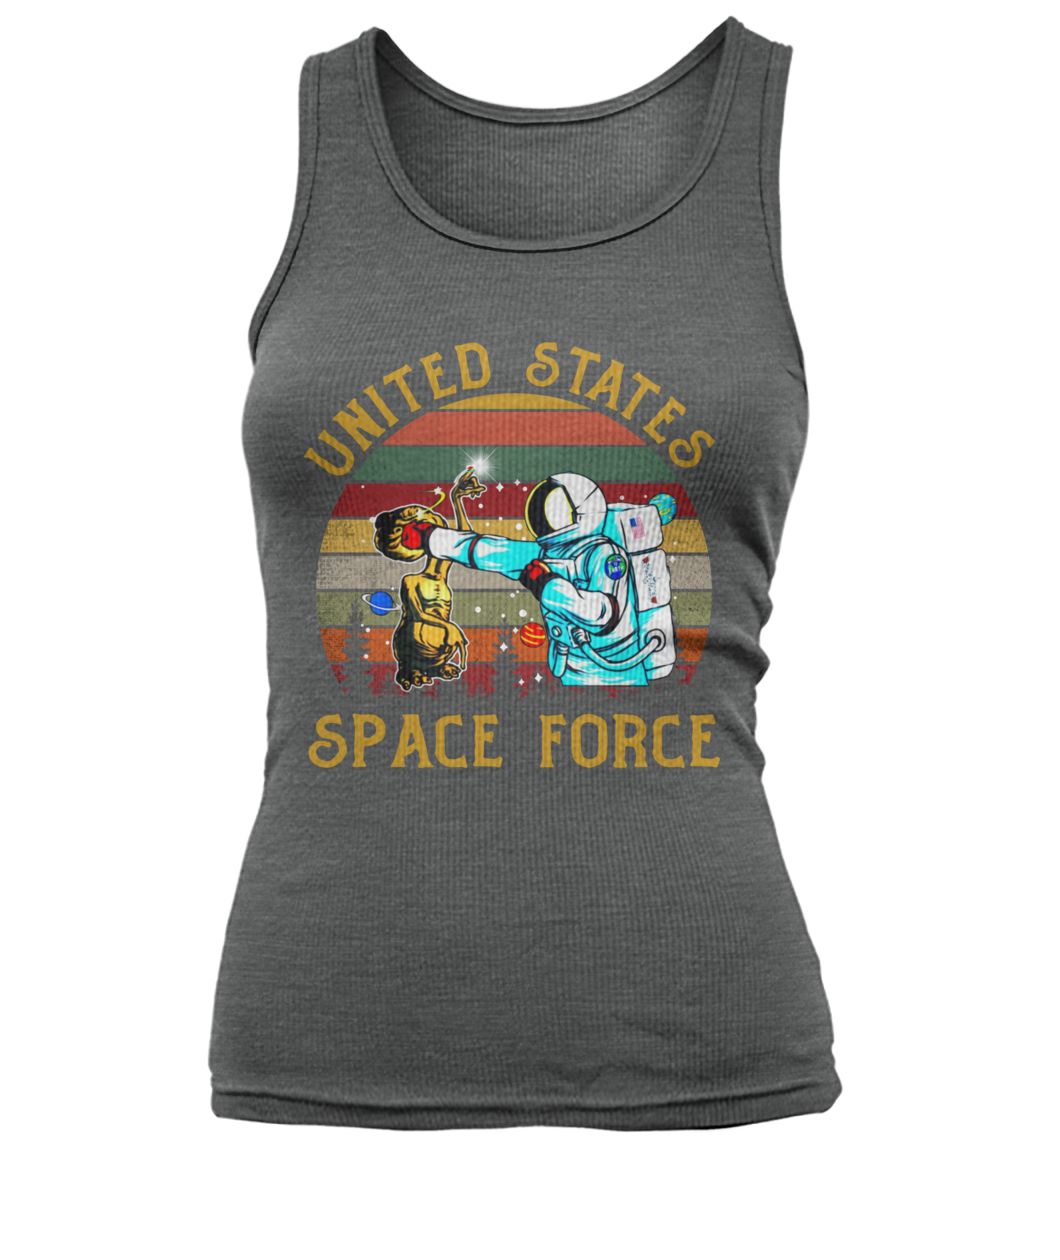 Vintage united states space force women's tank top